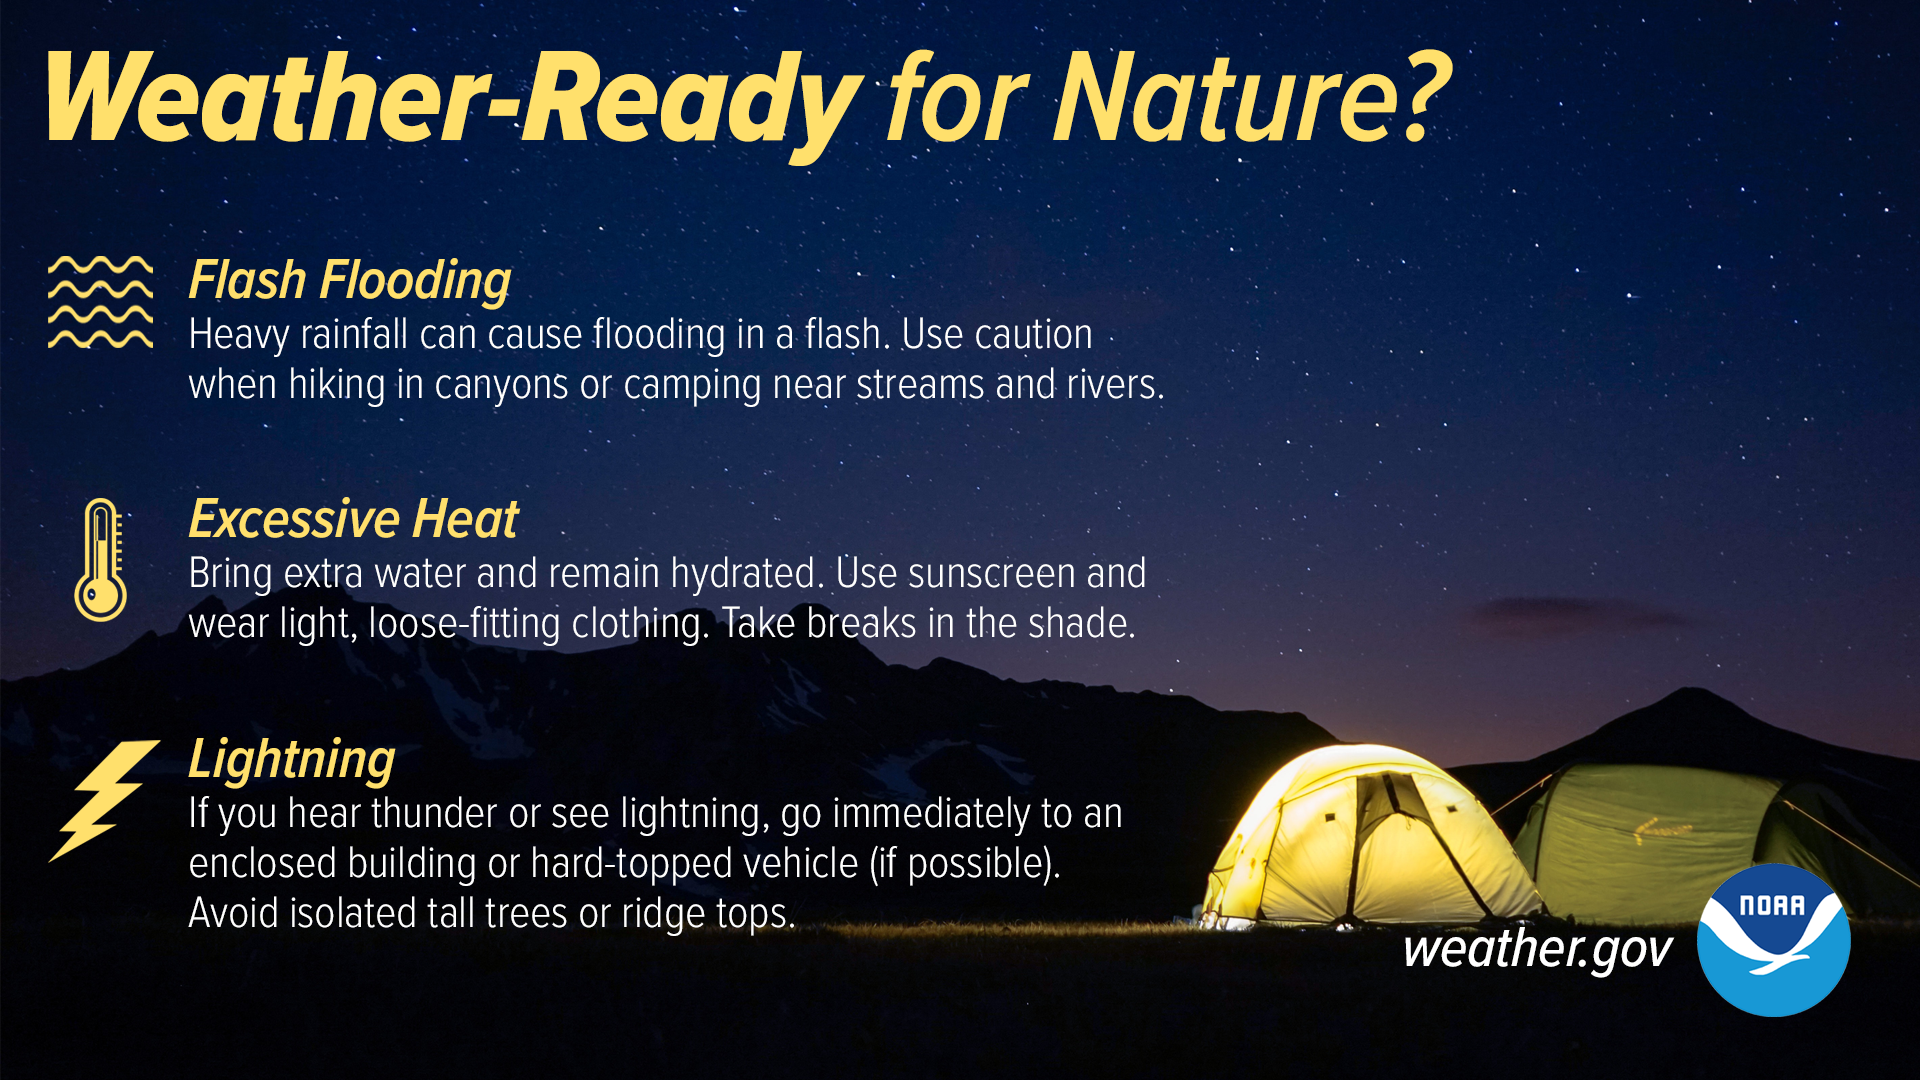 Weather-Ready for Nature? 1. Flash flooding: Heavy rainfall can cause flooding in a flash. Use caution when hiking in canyons or camping near streams and rivers. 2. Excessive Heat: Bring extra water and remain hydrated. Use sunscreen and wear light, loose-fitting clothing. Take breaks in the shade. 3. Lightning: If you hear thunder or see lightning, go immediately to an enclosed building or hard-topped vehicle (if possible). Avoid isolated tall trees or ridge tops.